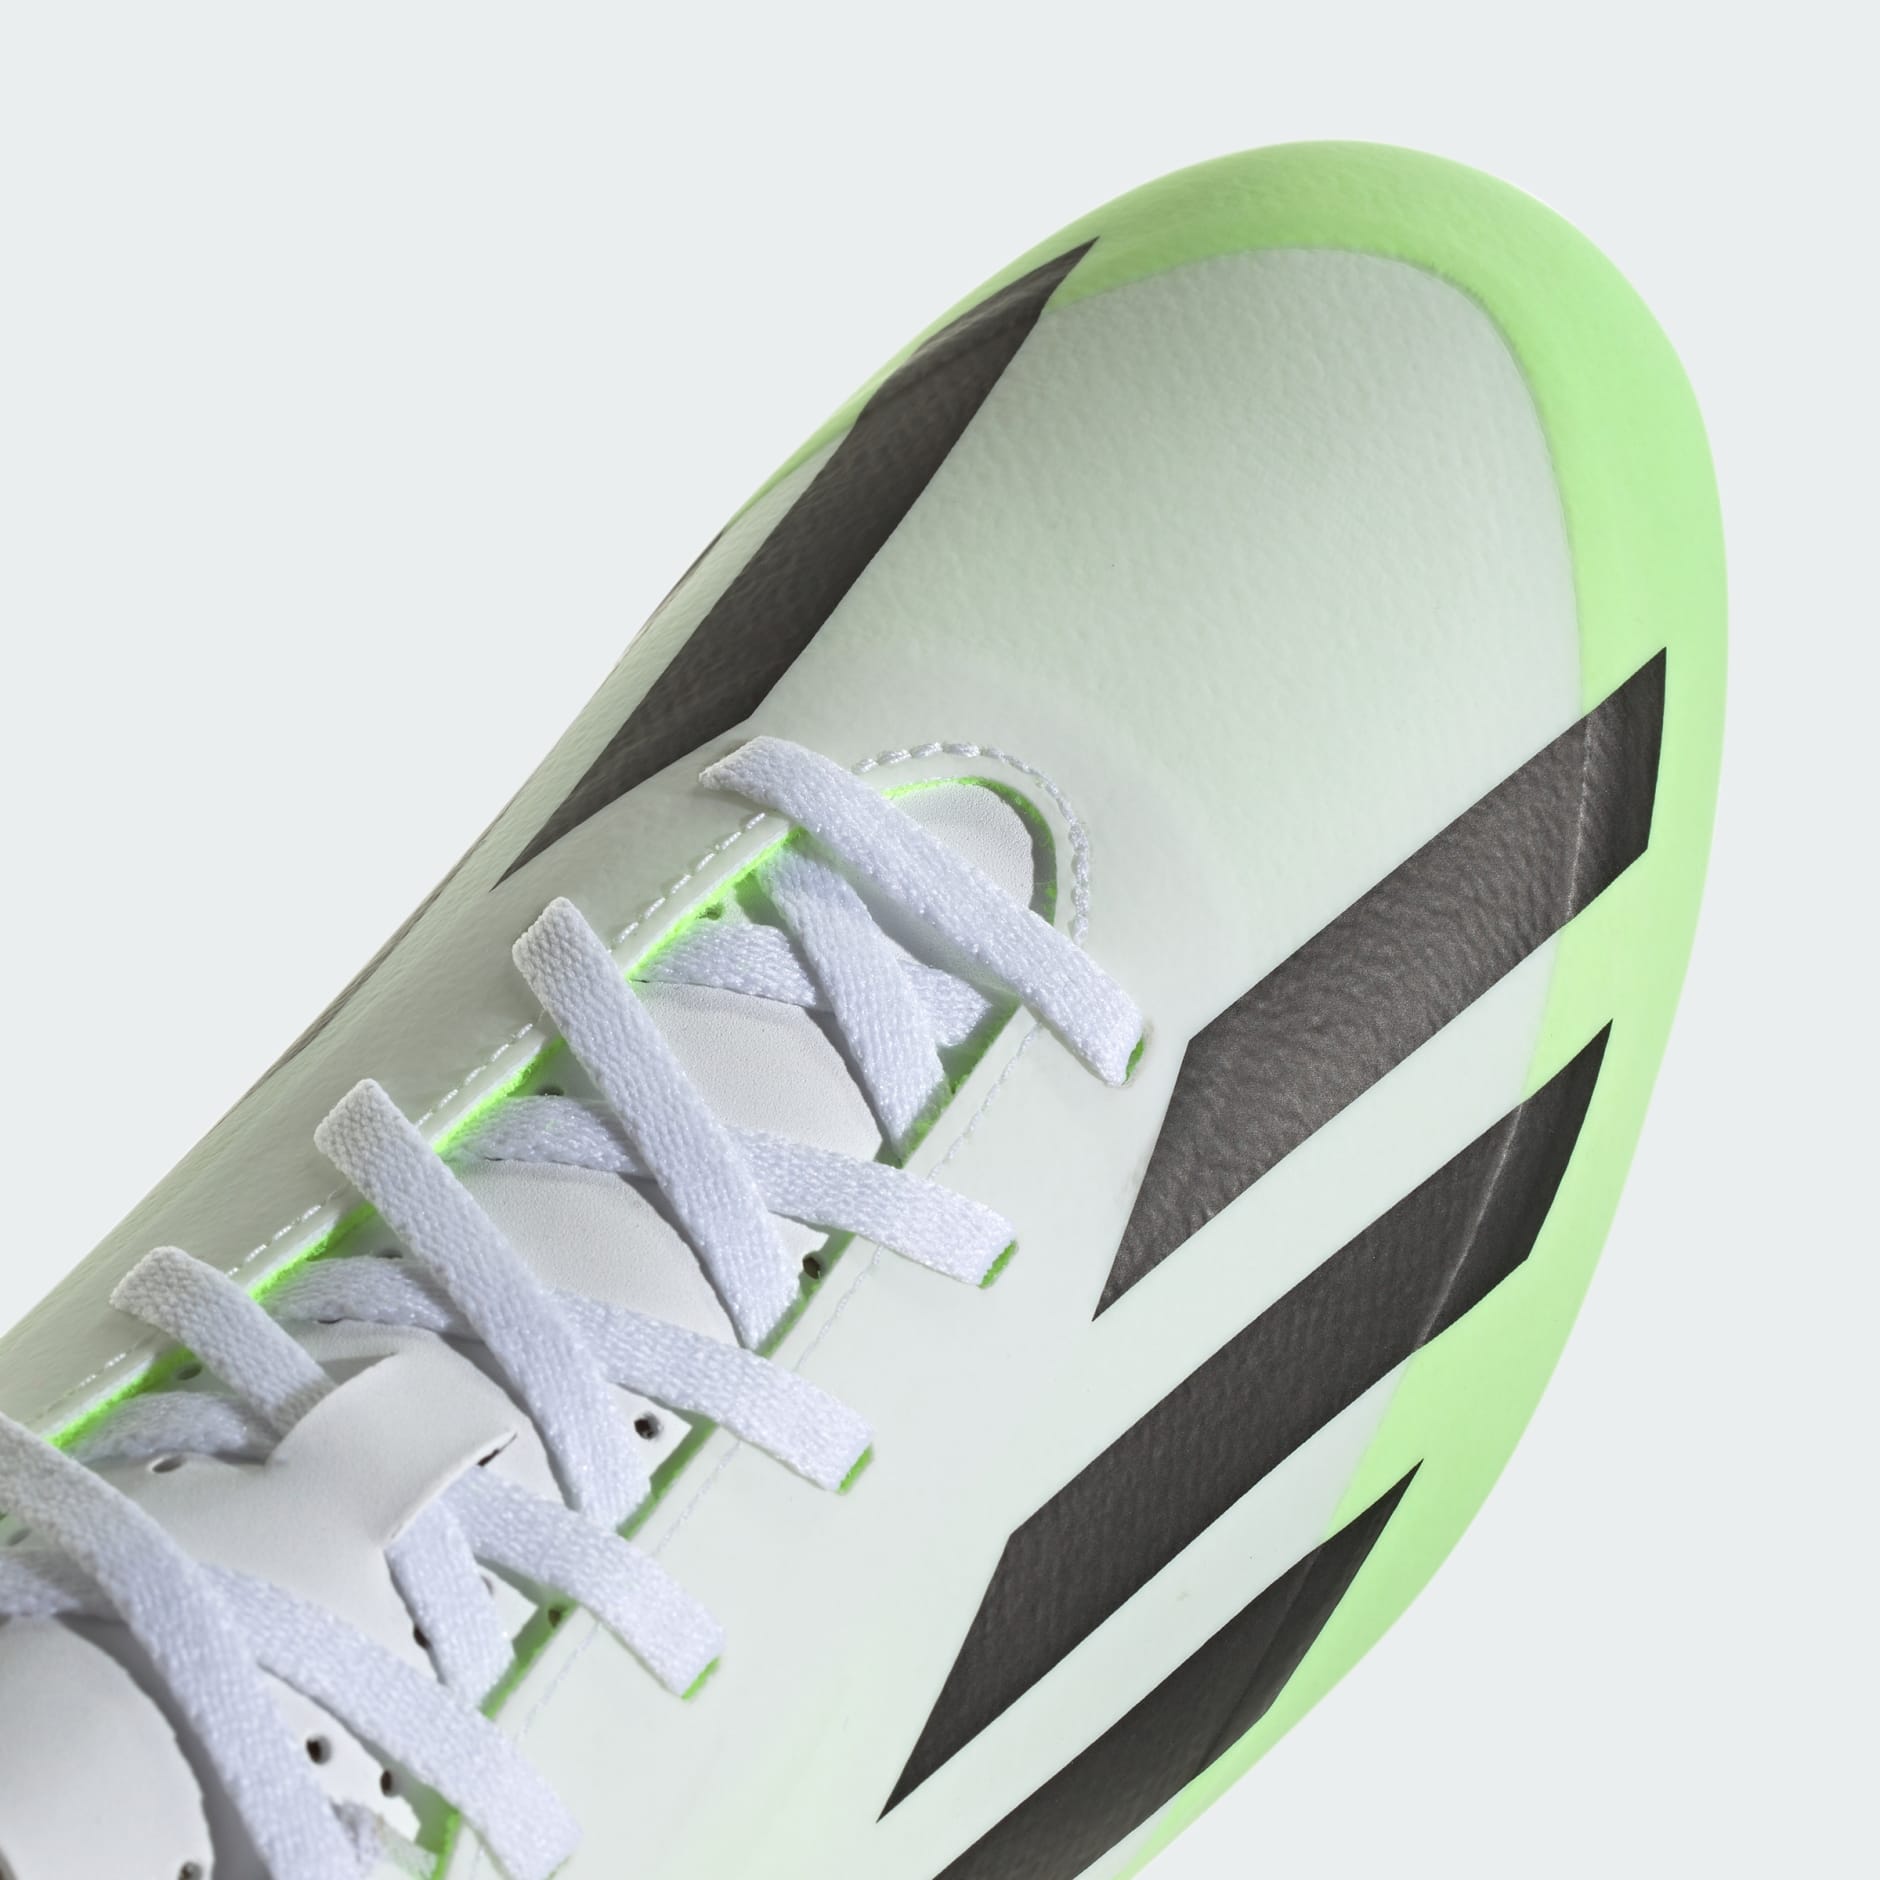 All products - X Crazyfast.4 Flexible Ground Boots - White | adidas ...